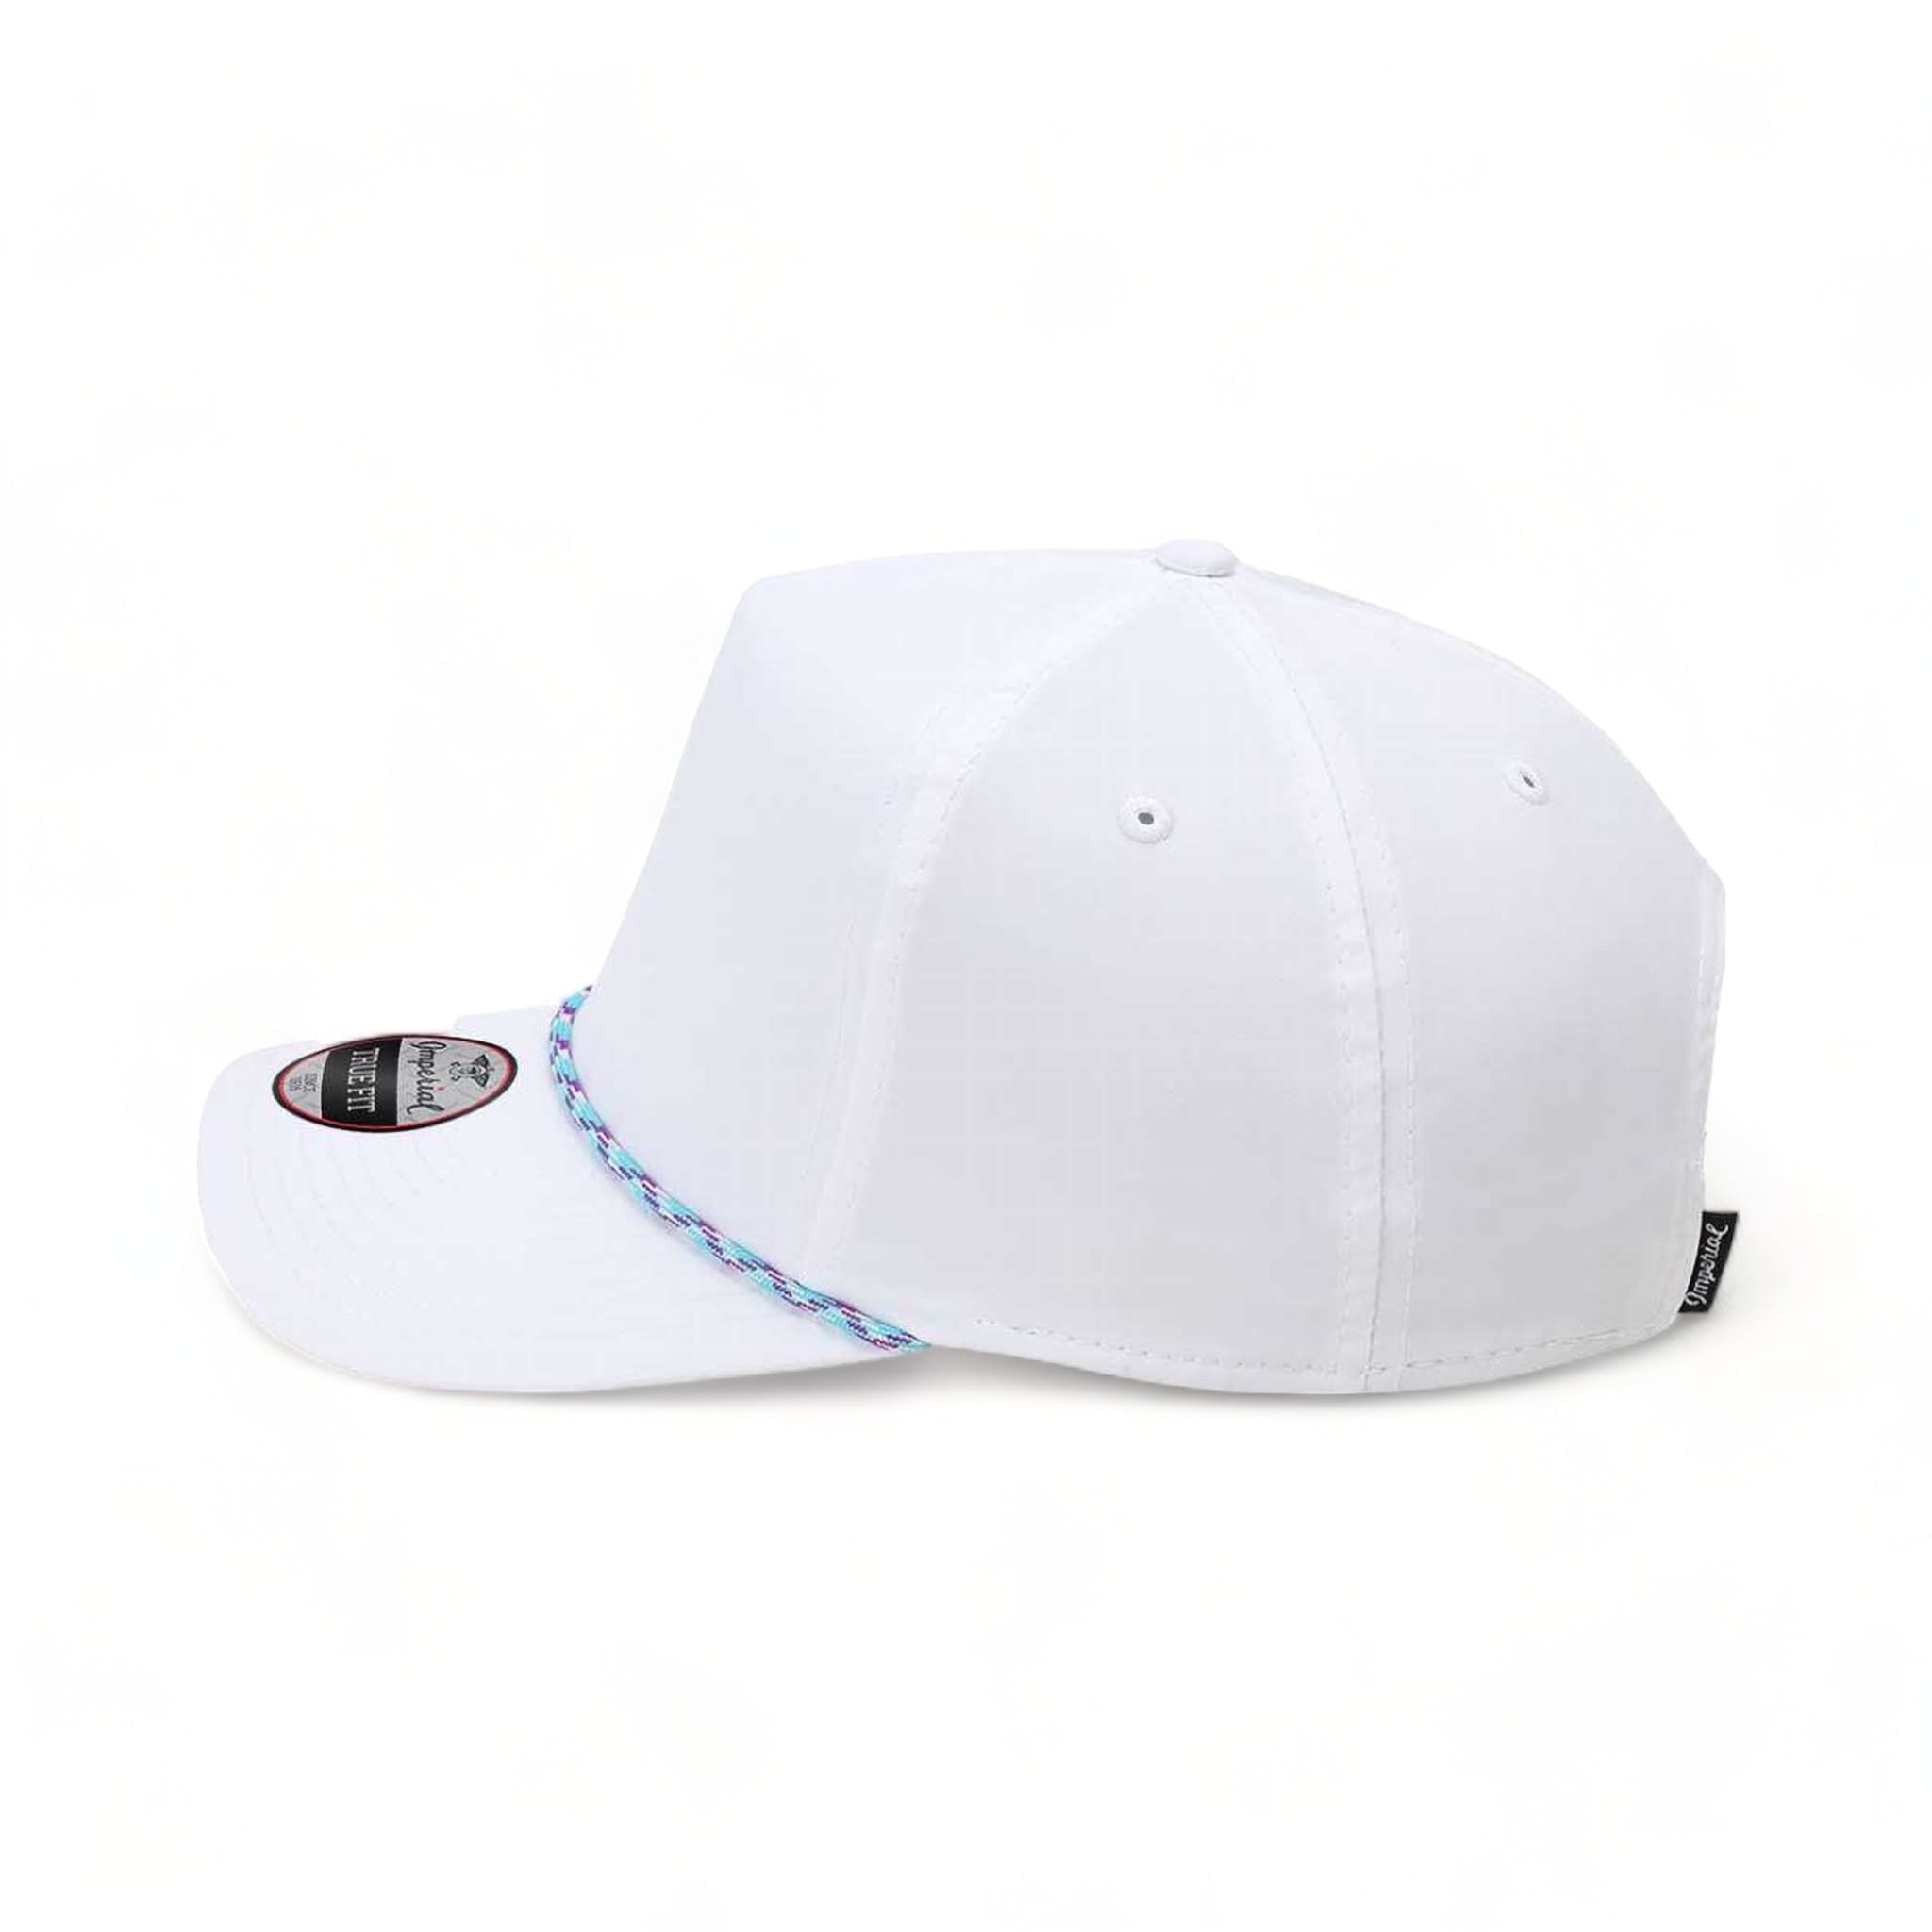 Side view of Imperial 5054 custom hat in white and teal-purple